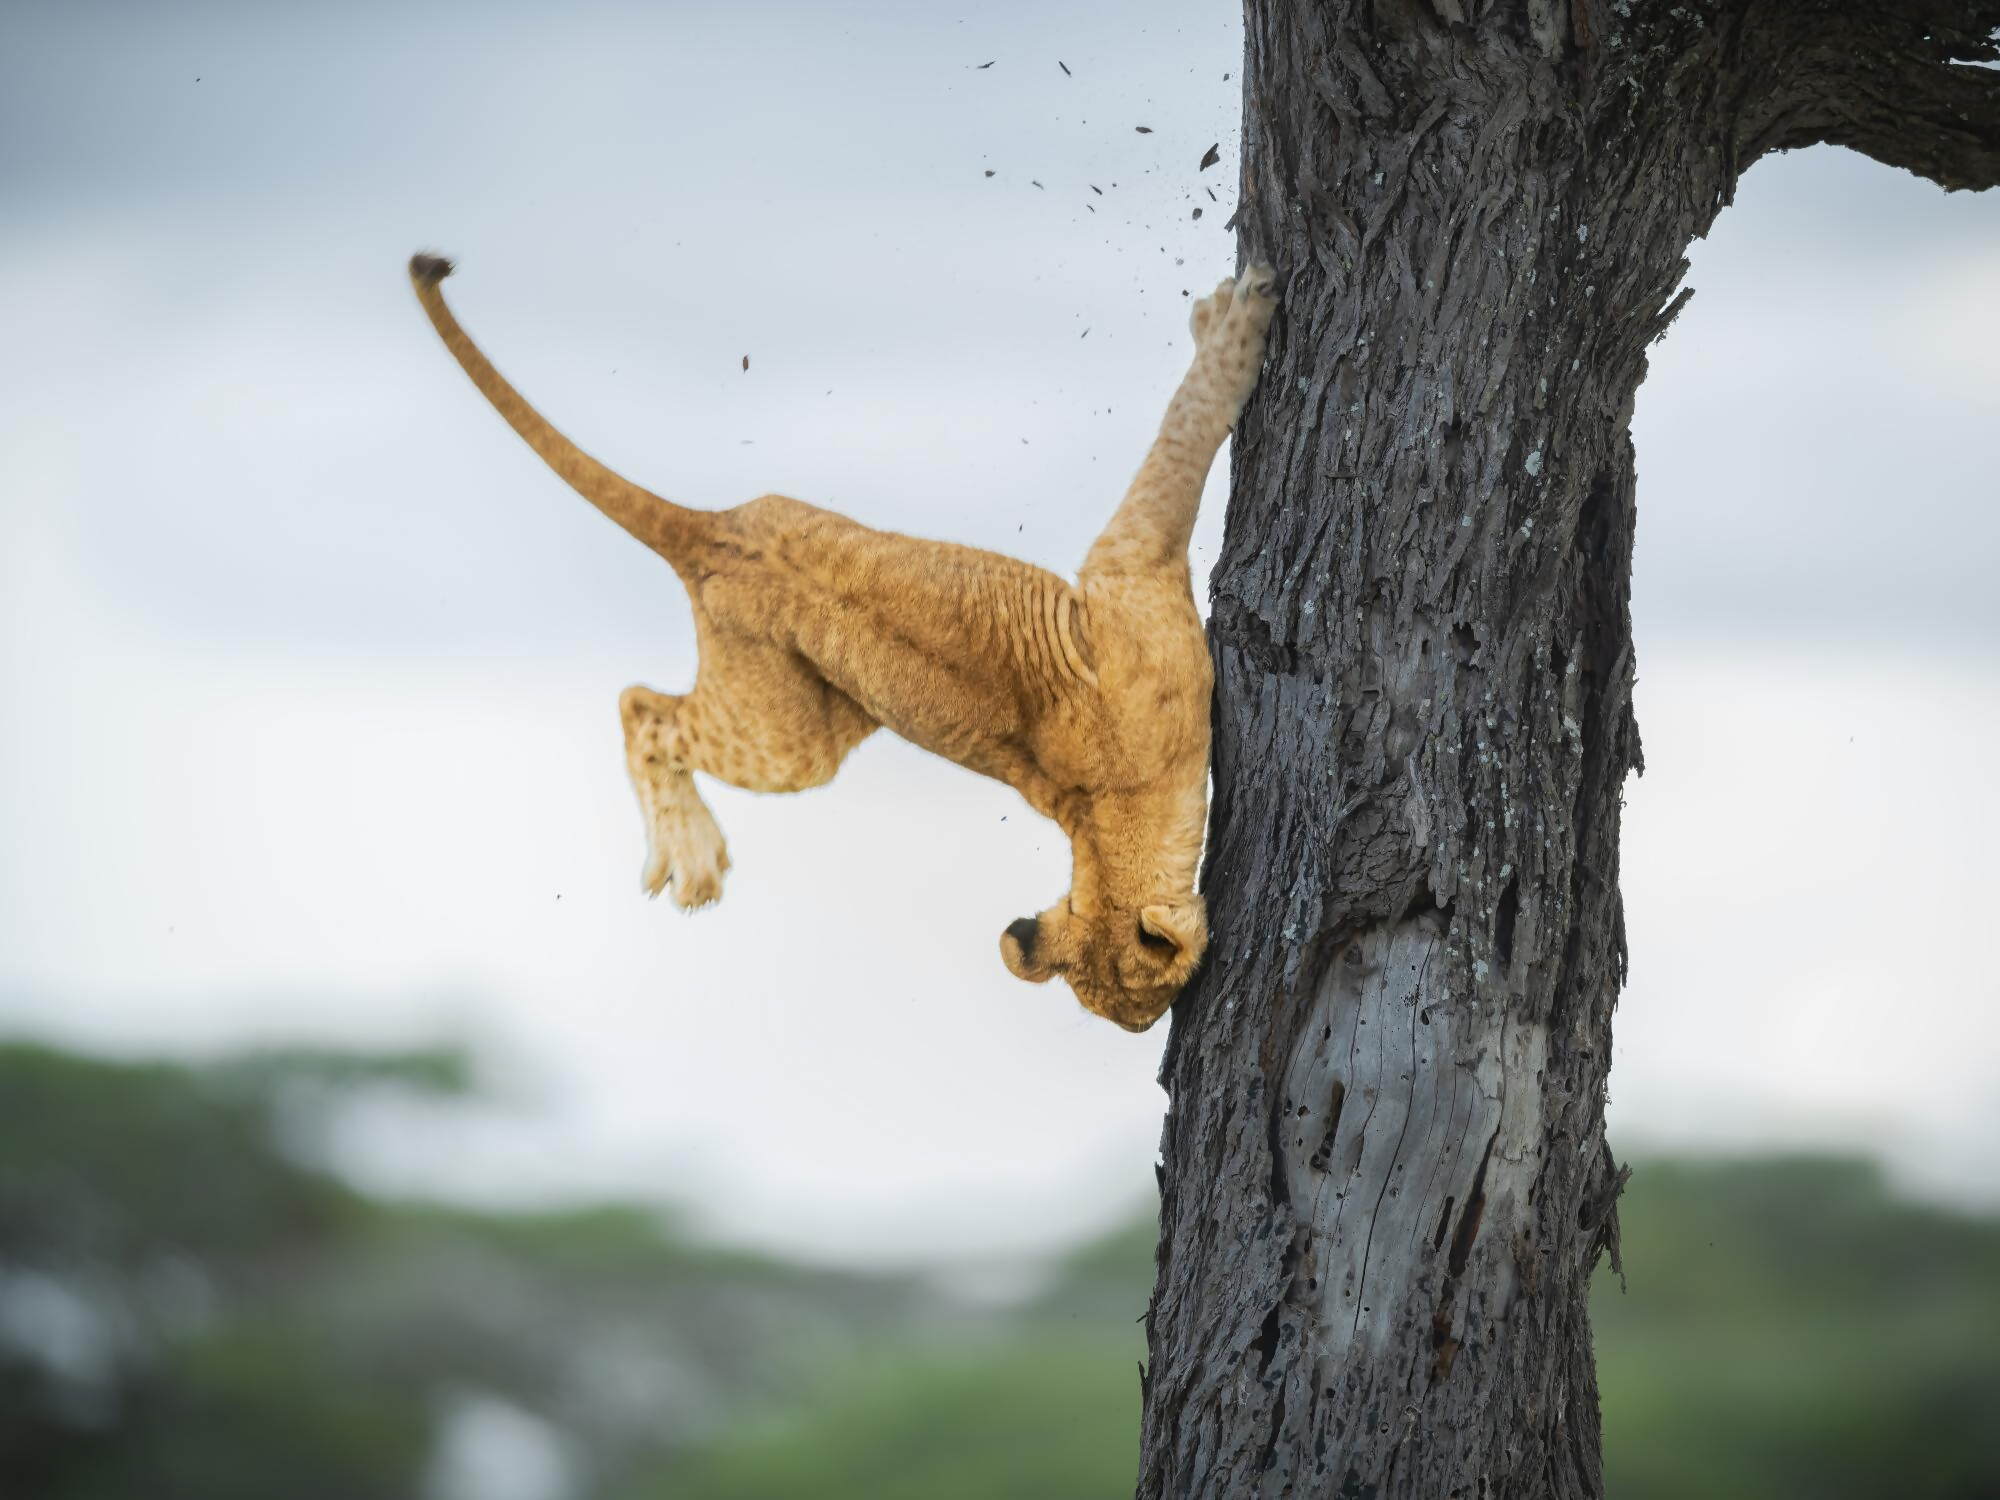 A three-month-old lion cub tries to descend a tree in Serengeti, Tanzania